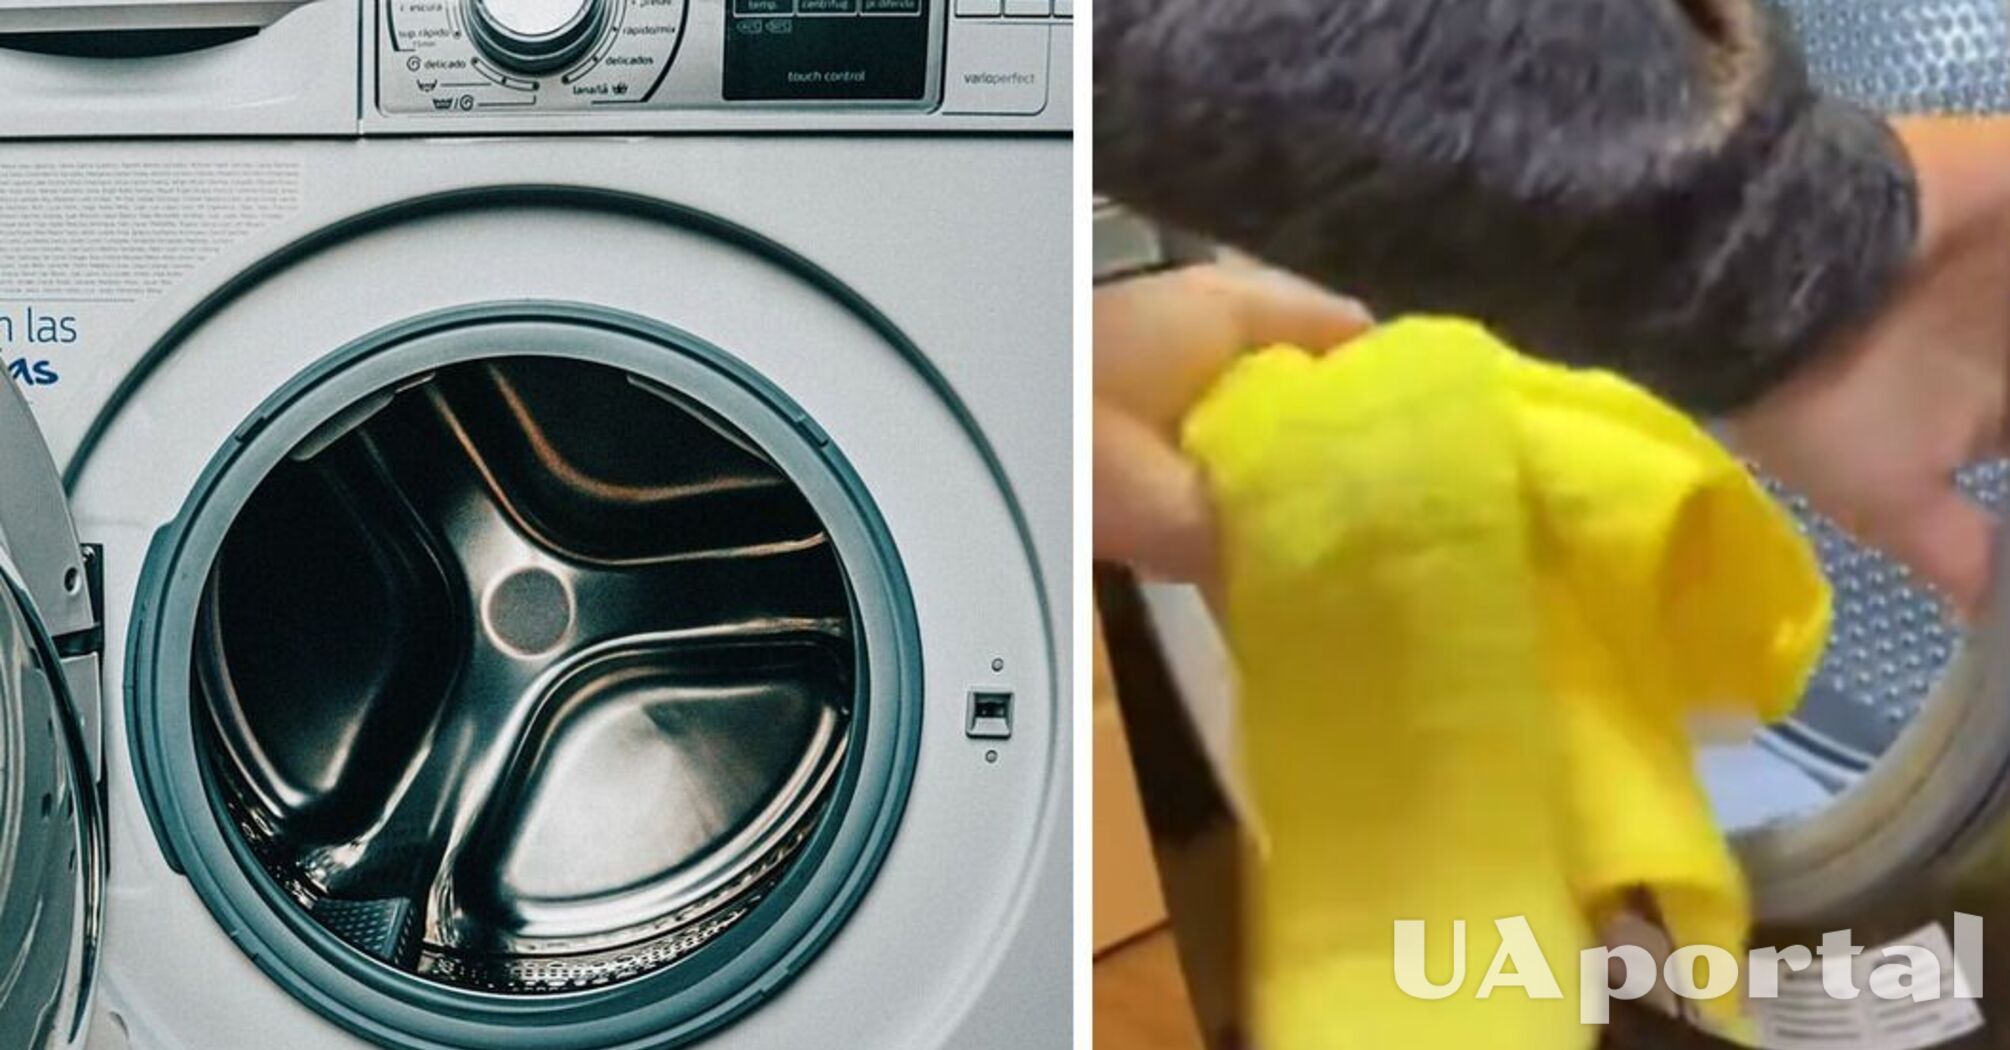 Experts show an easy way to get rid of mold in a washing machine without aggressive chemicals